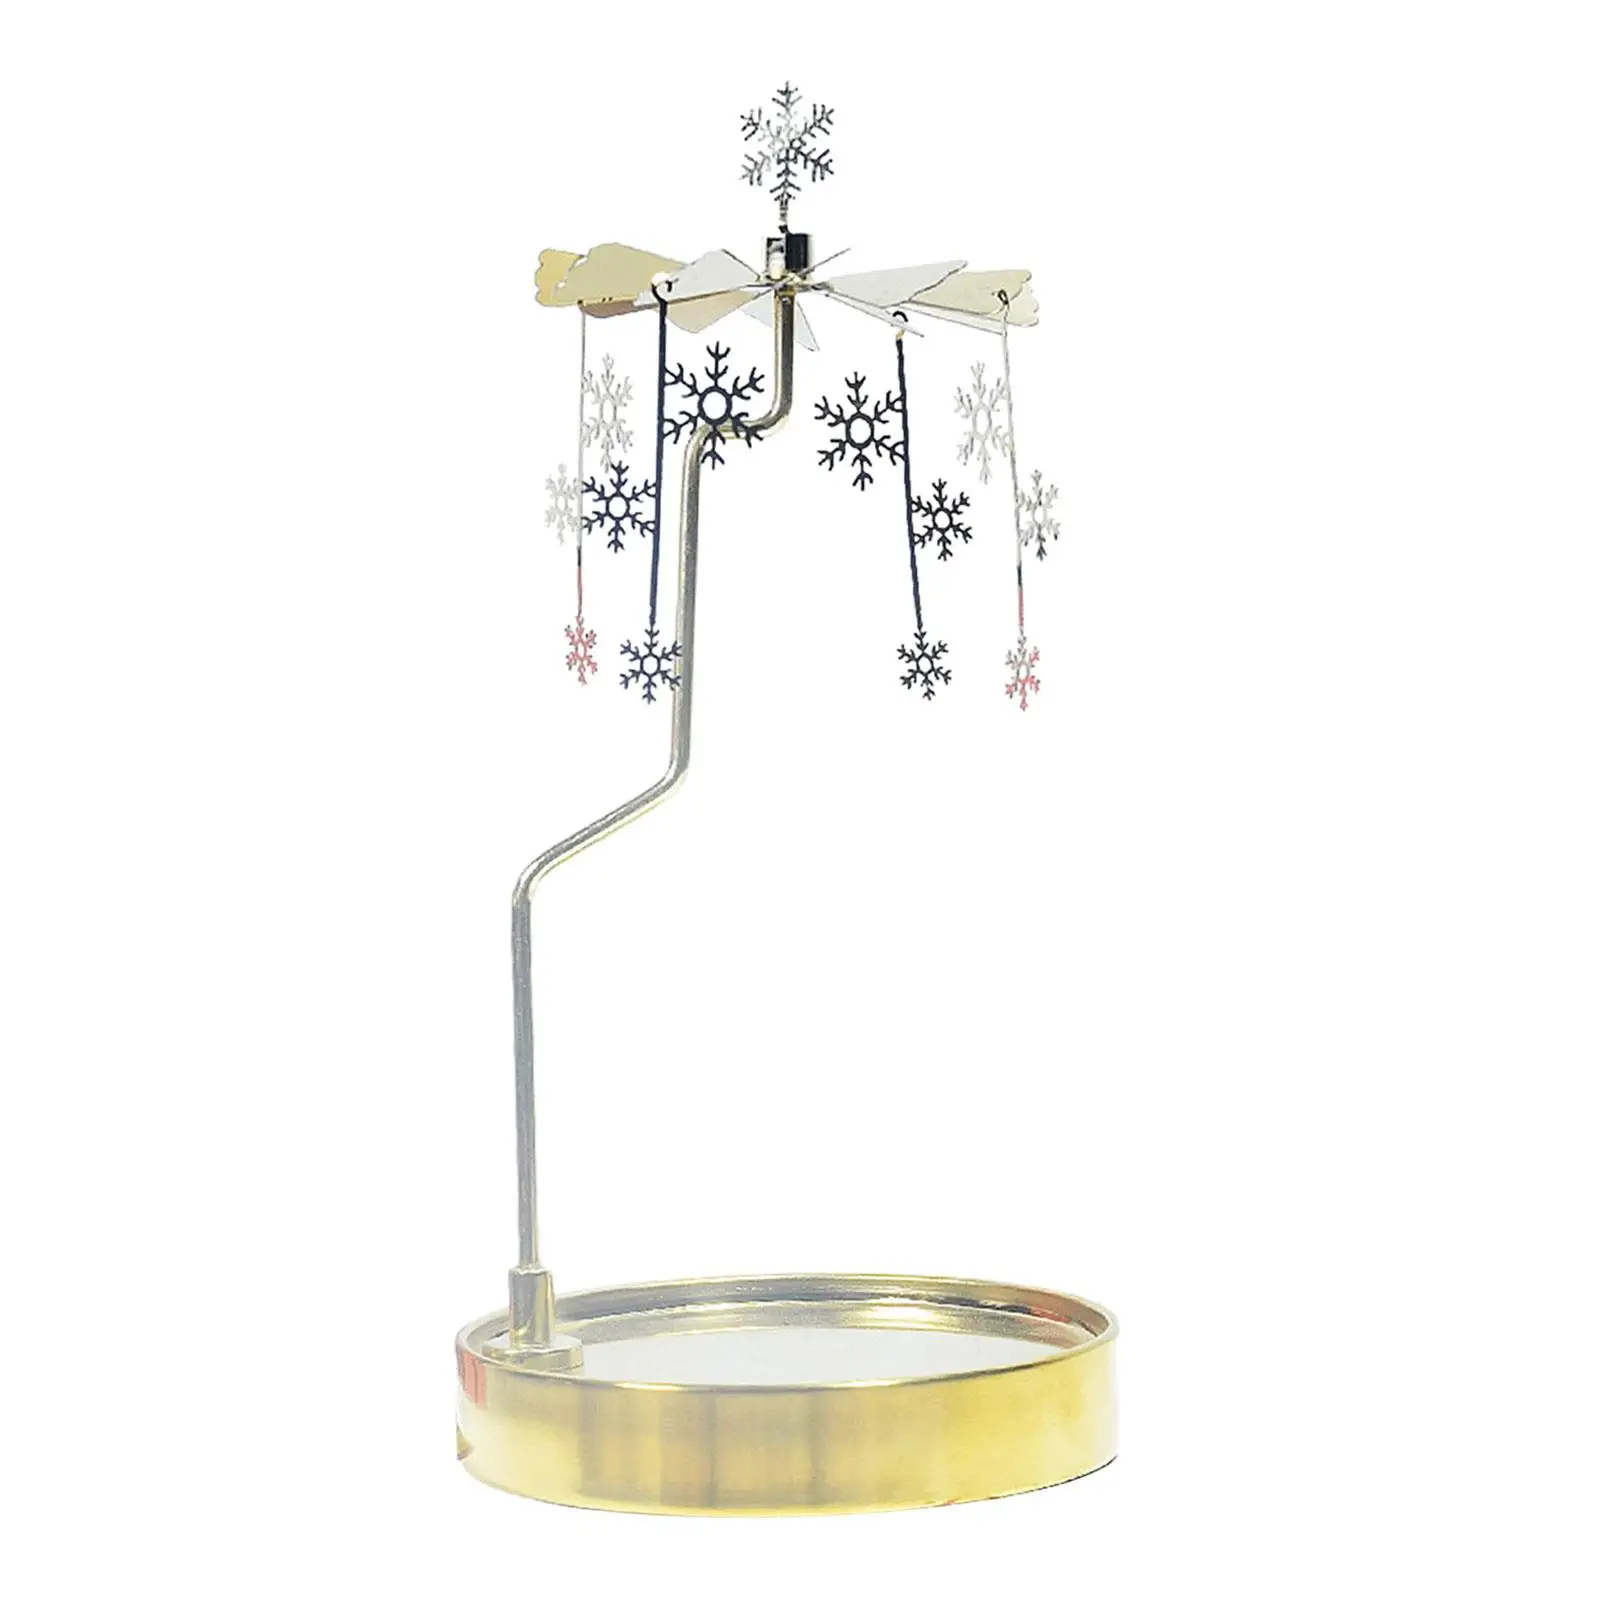 Rotating Candle Holder with Tray Romantic Rotating Candlestick Holder for Festivals Dining Room Dinner Table Living Room